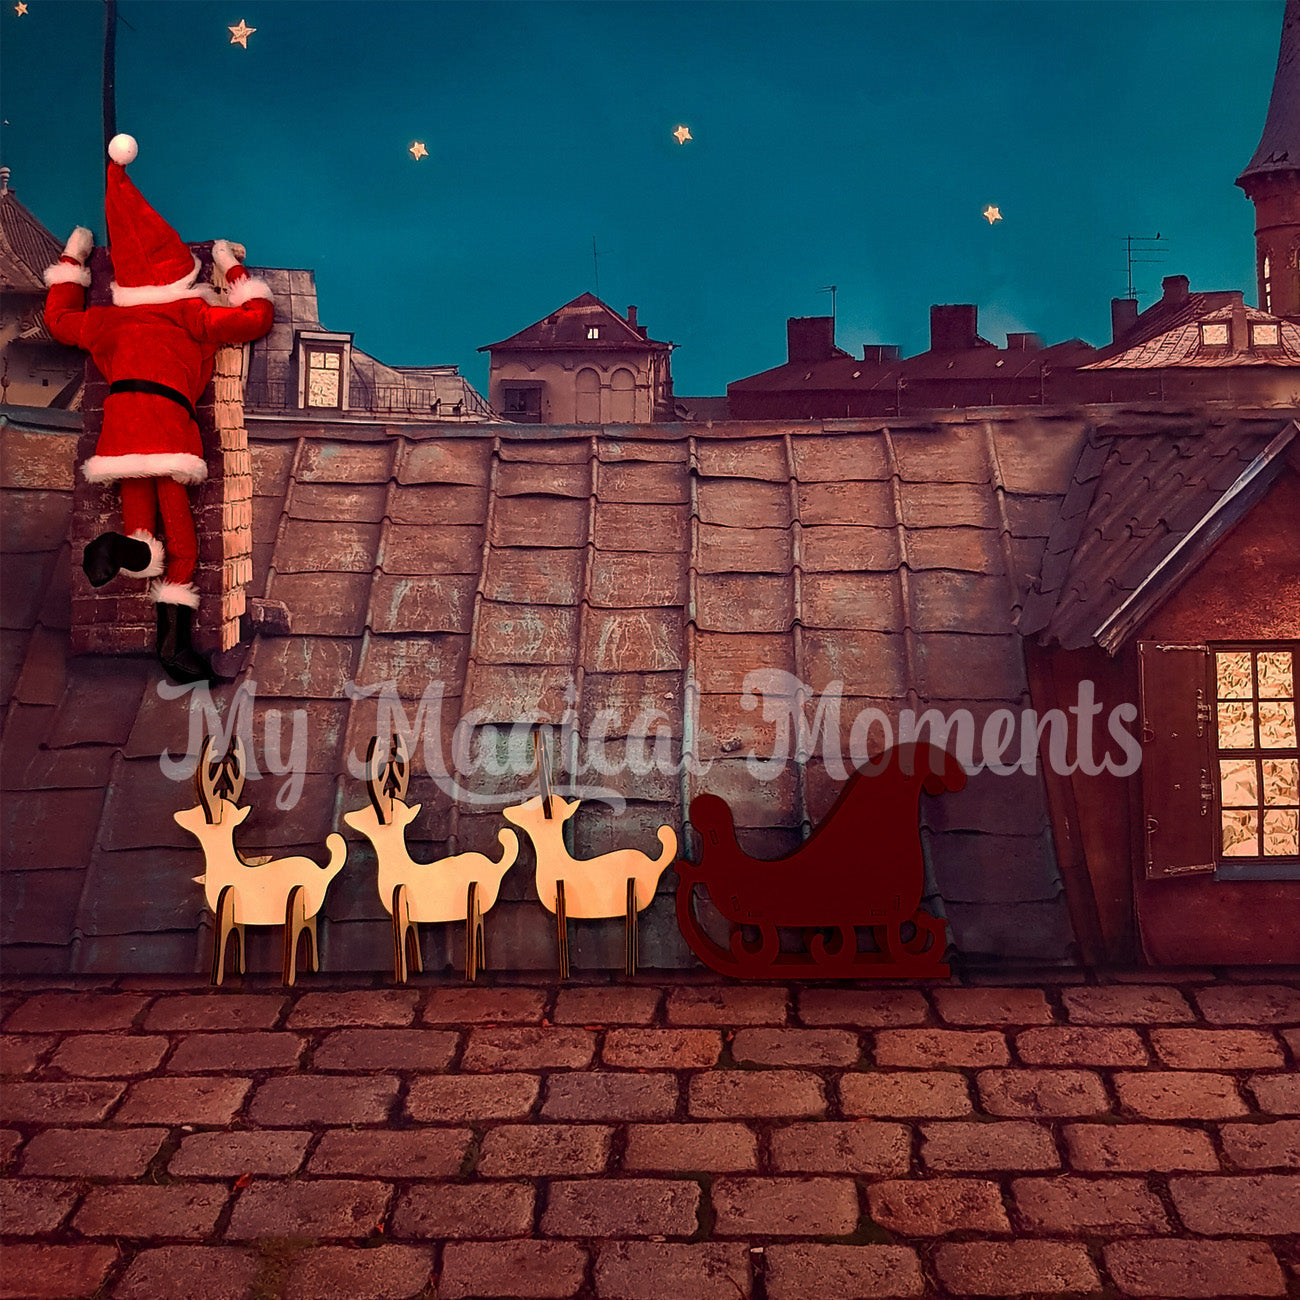 Santa elf on the roof with sleigh and reindeers